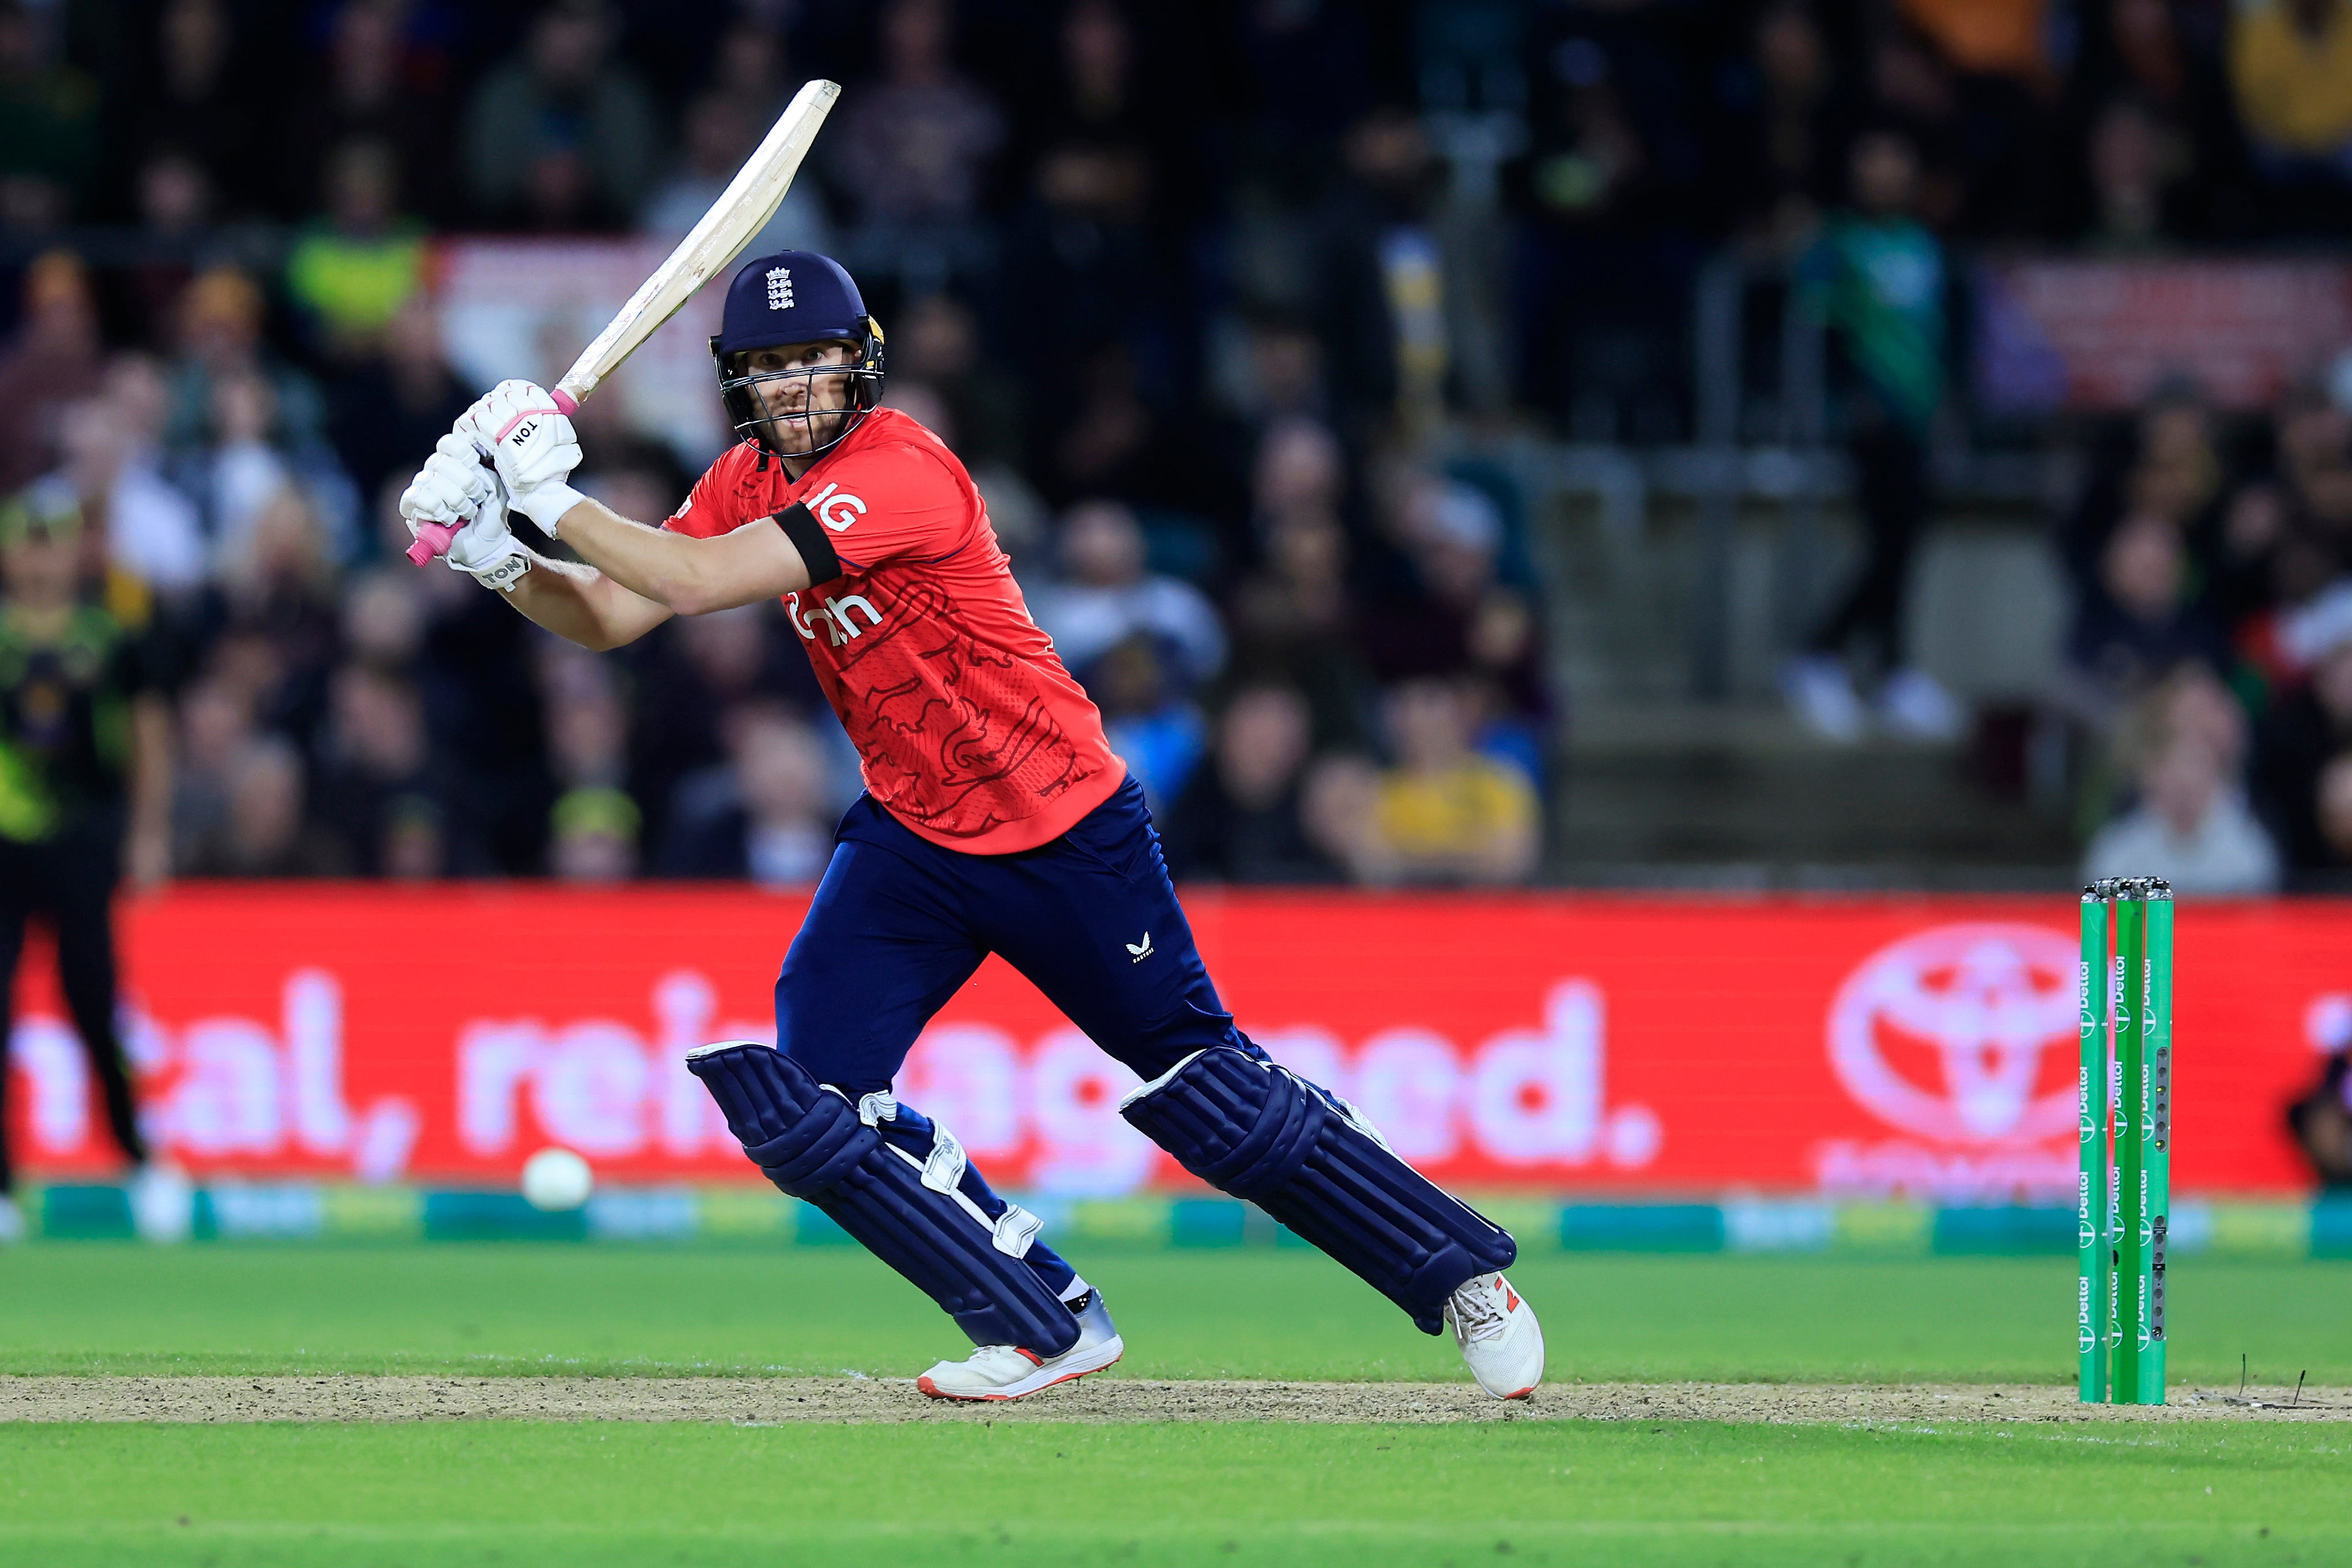 Malan hit 82 from 48 balls in his 50th T20 international